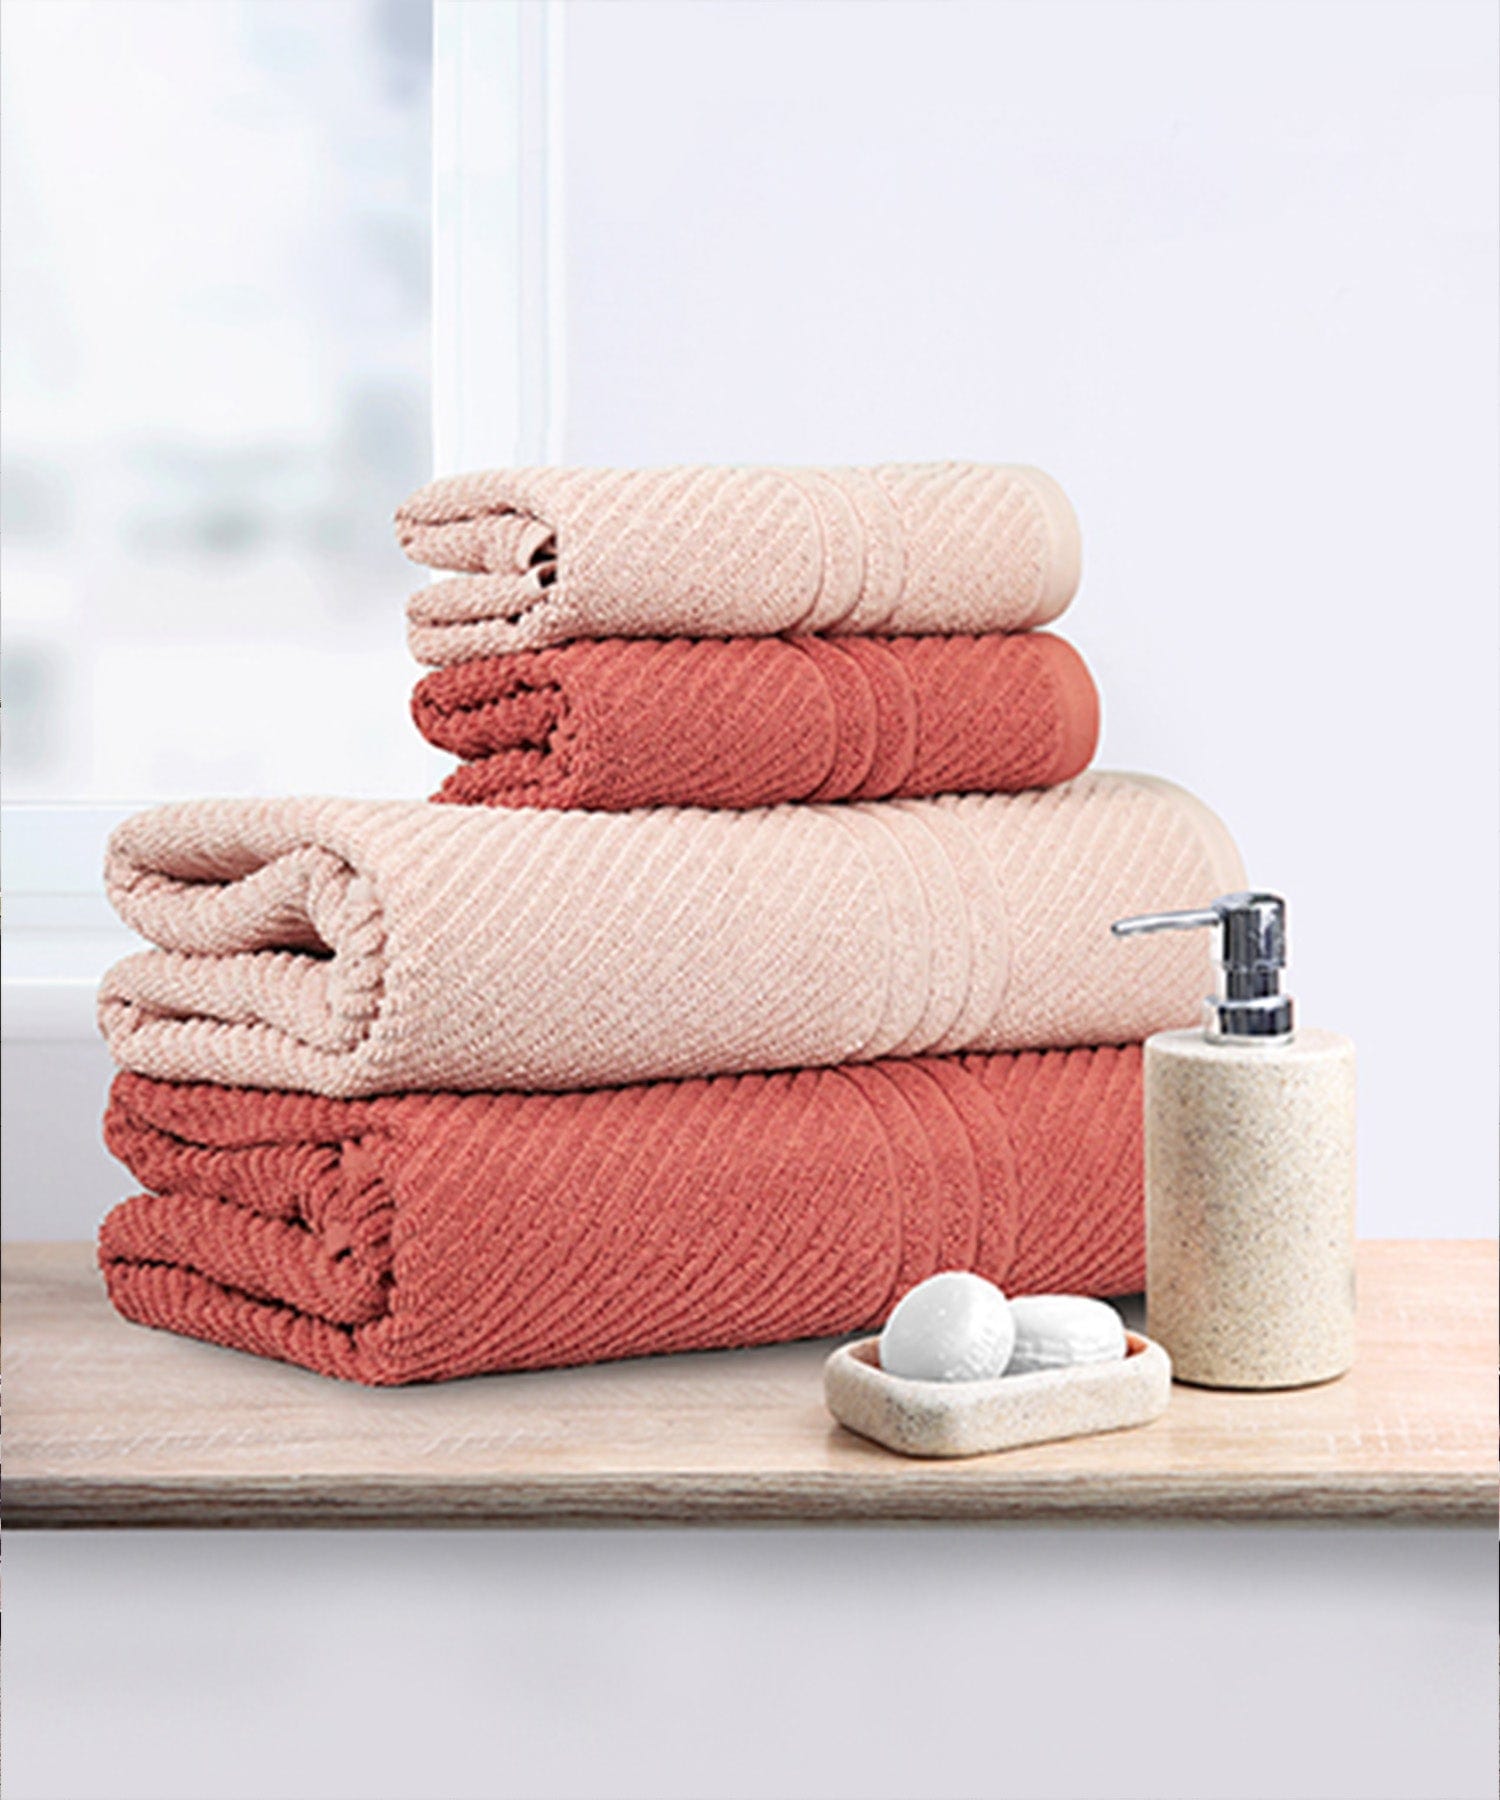 AROMA TOWEL,100% Cotton,Durable,Super Soft, STAWBERRY